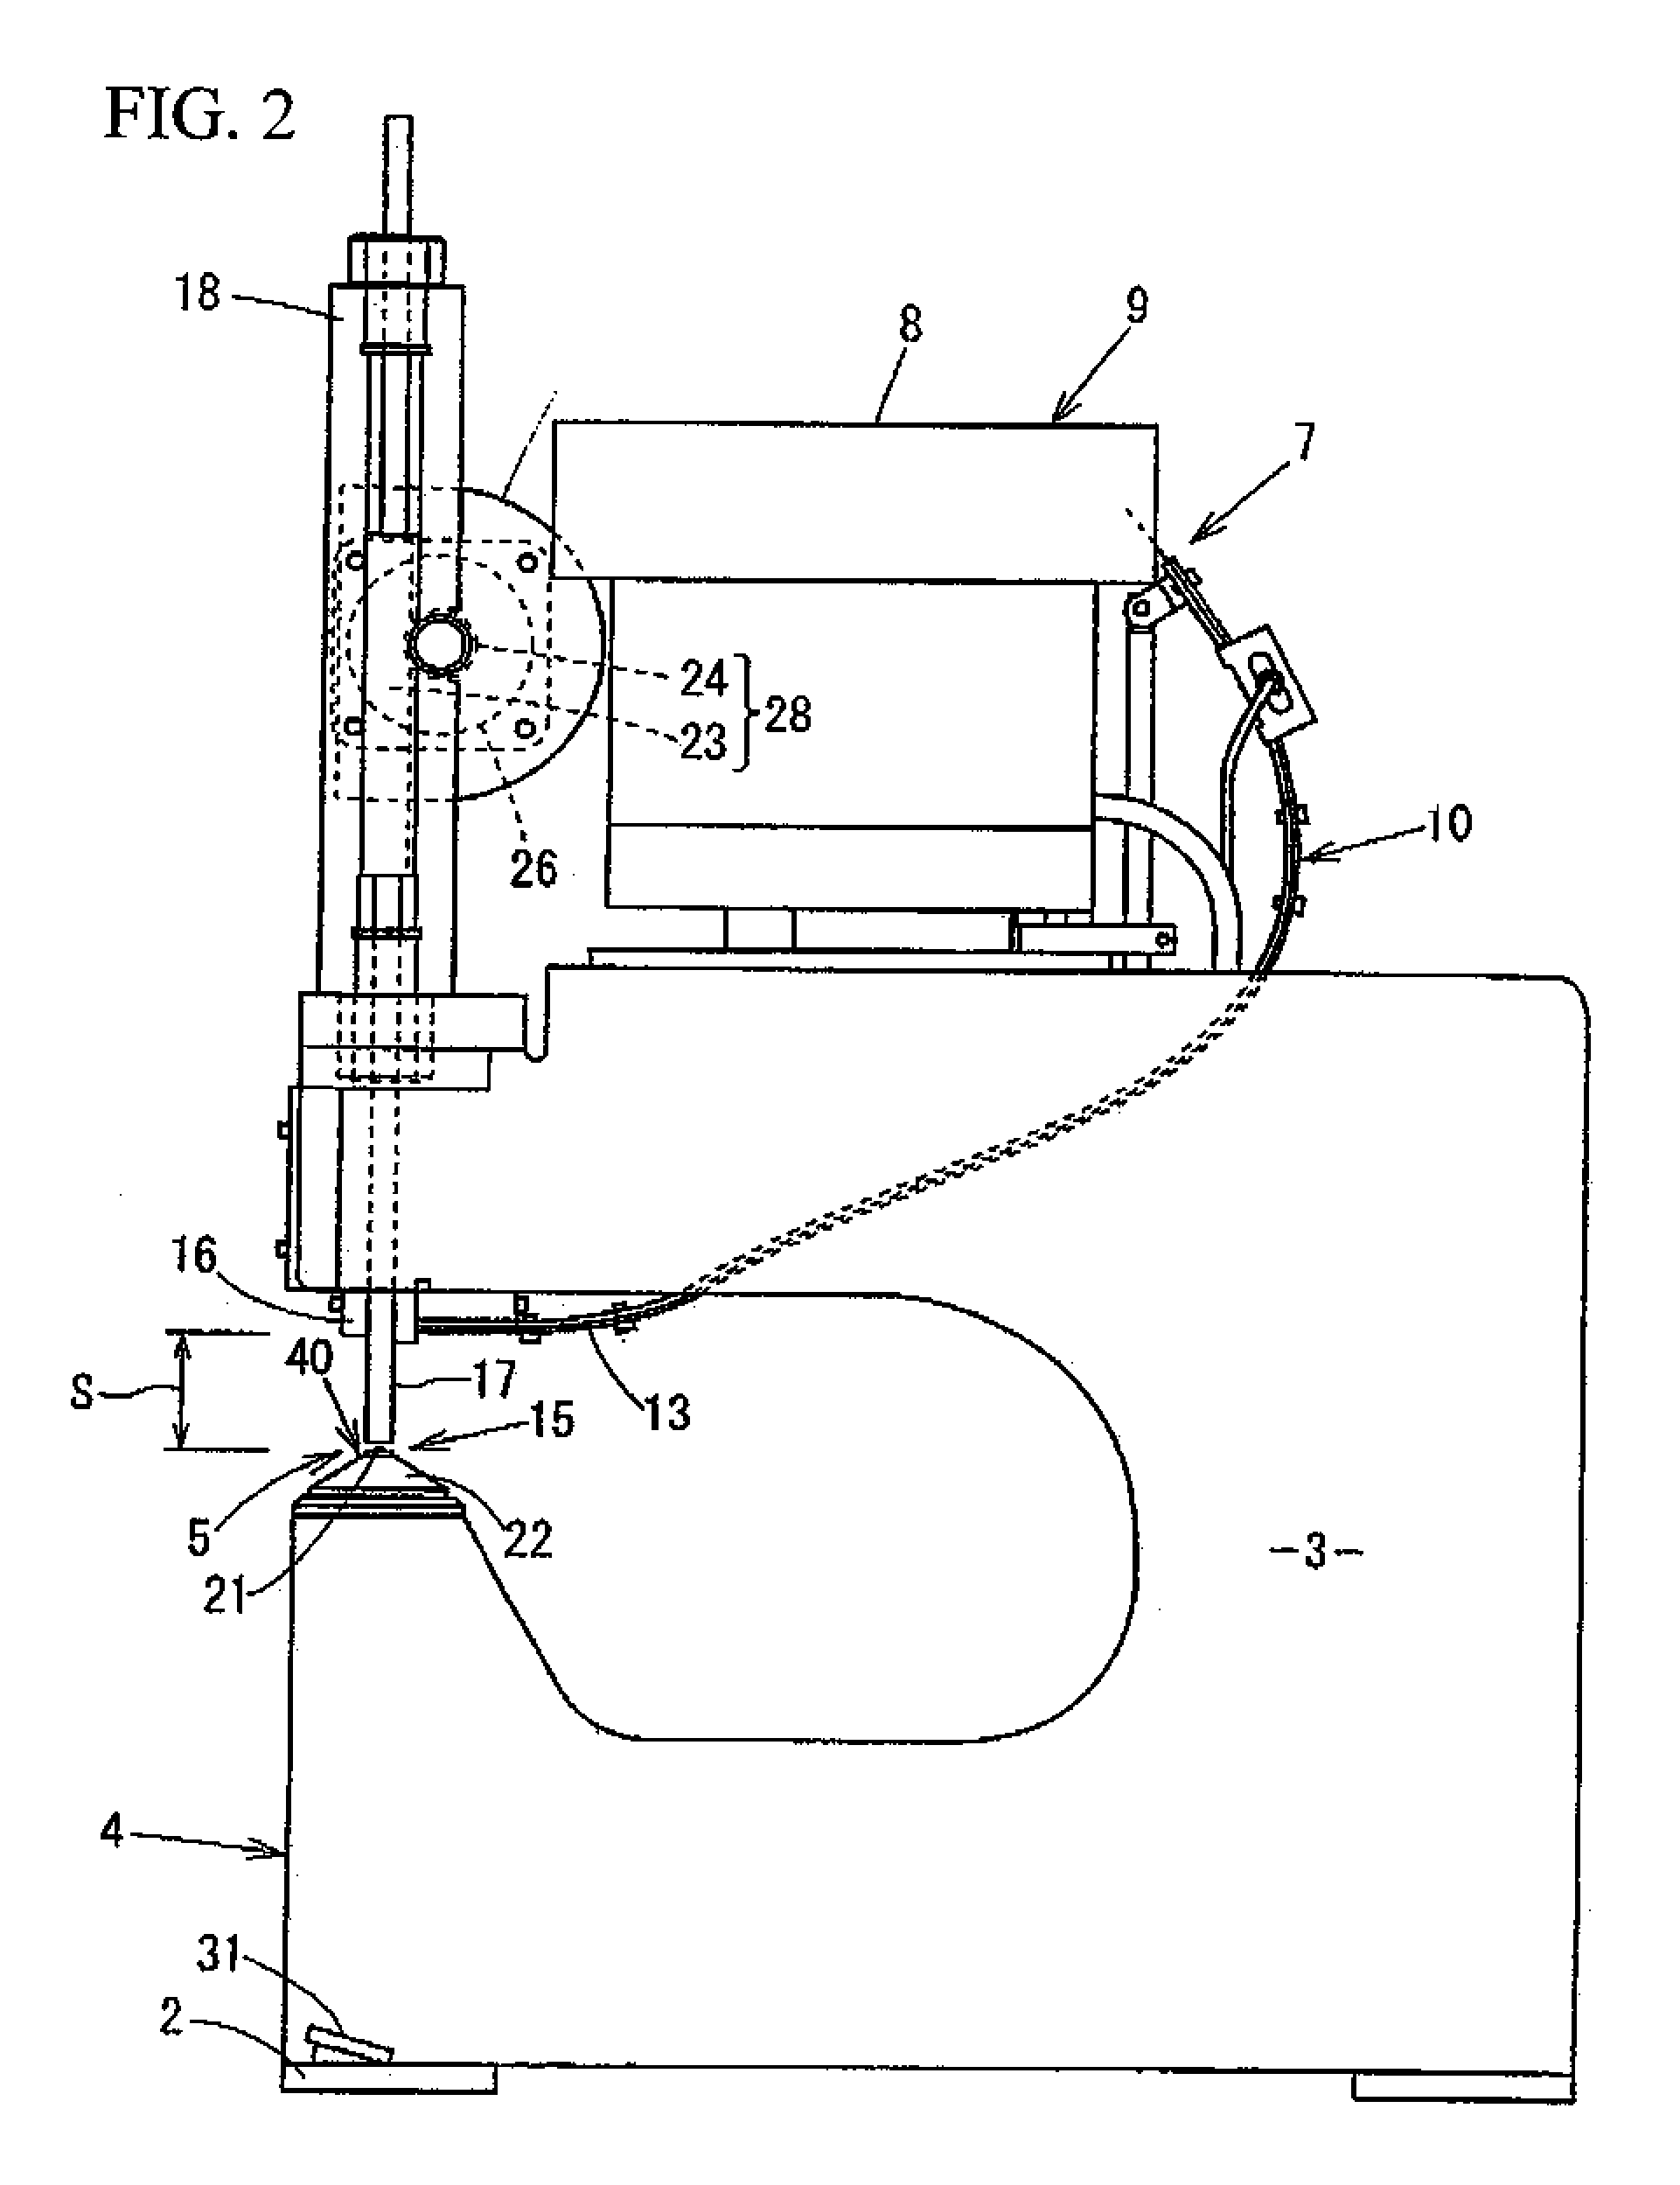 Apparatus for nailing t-nuts